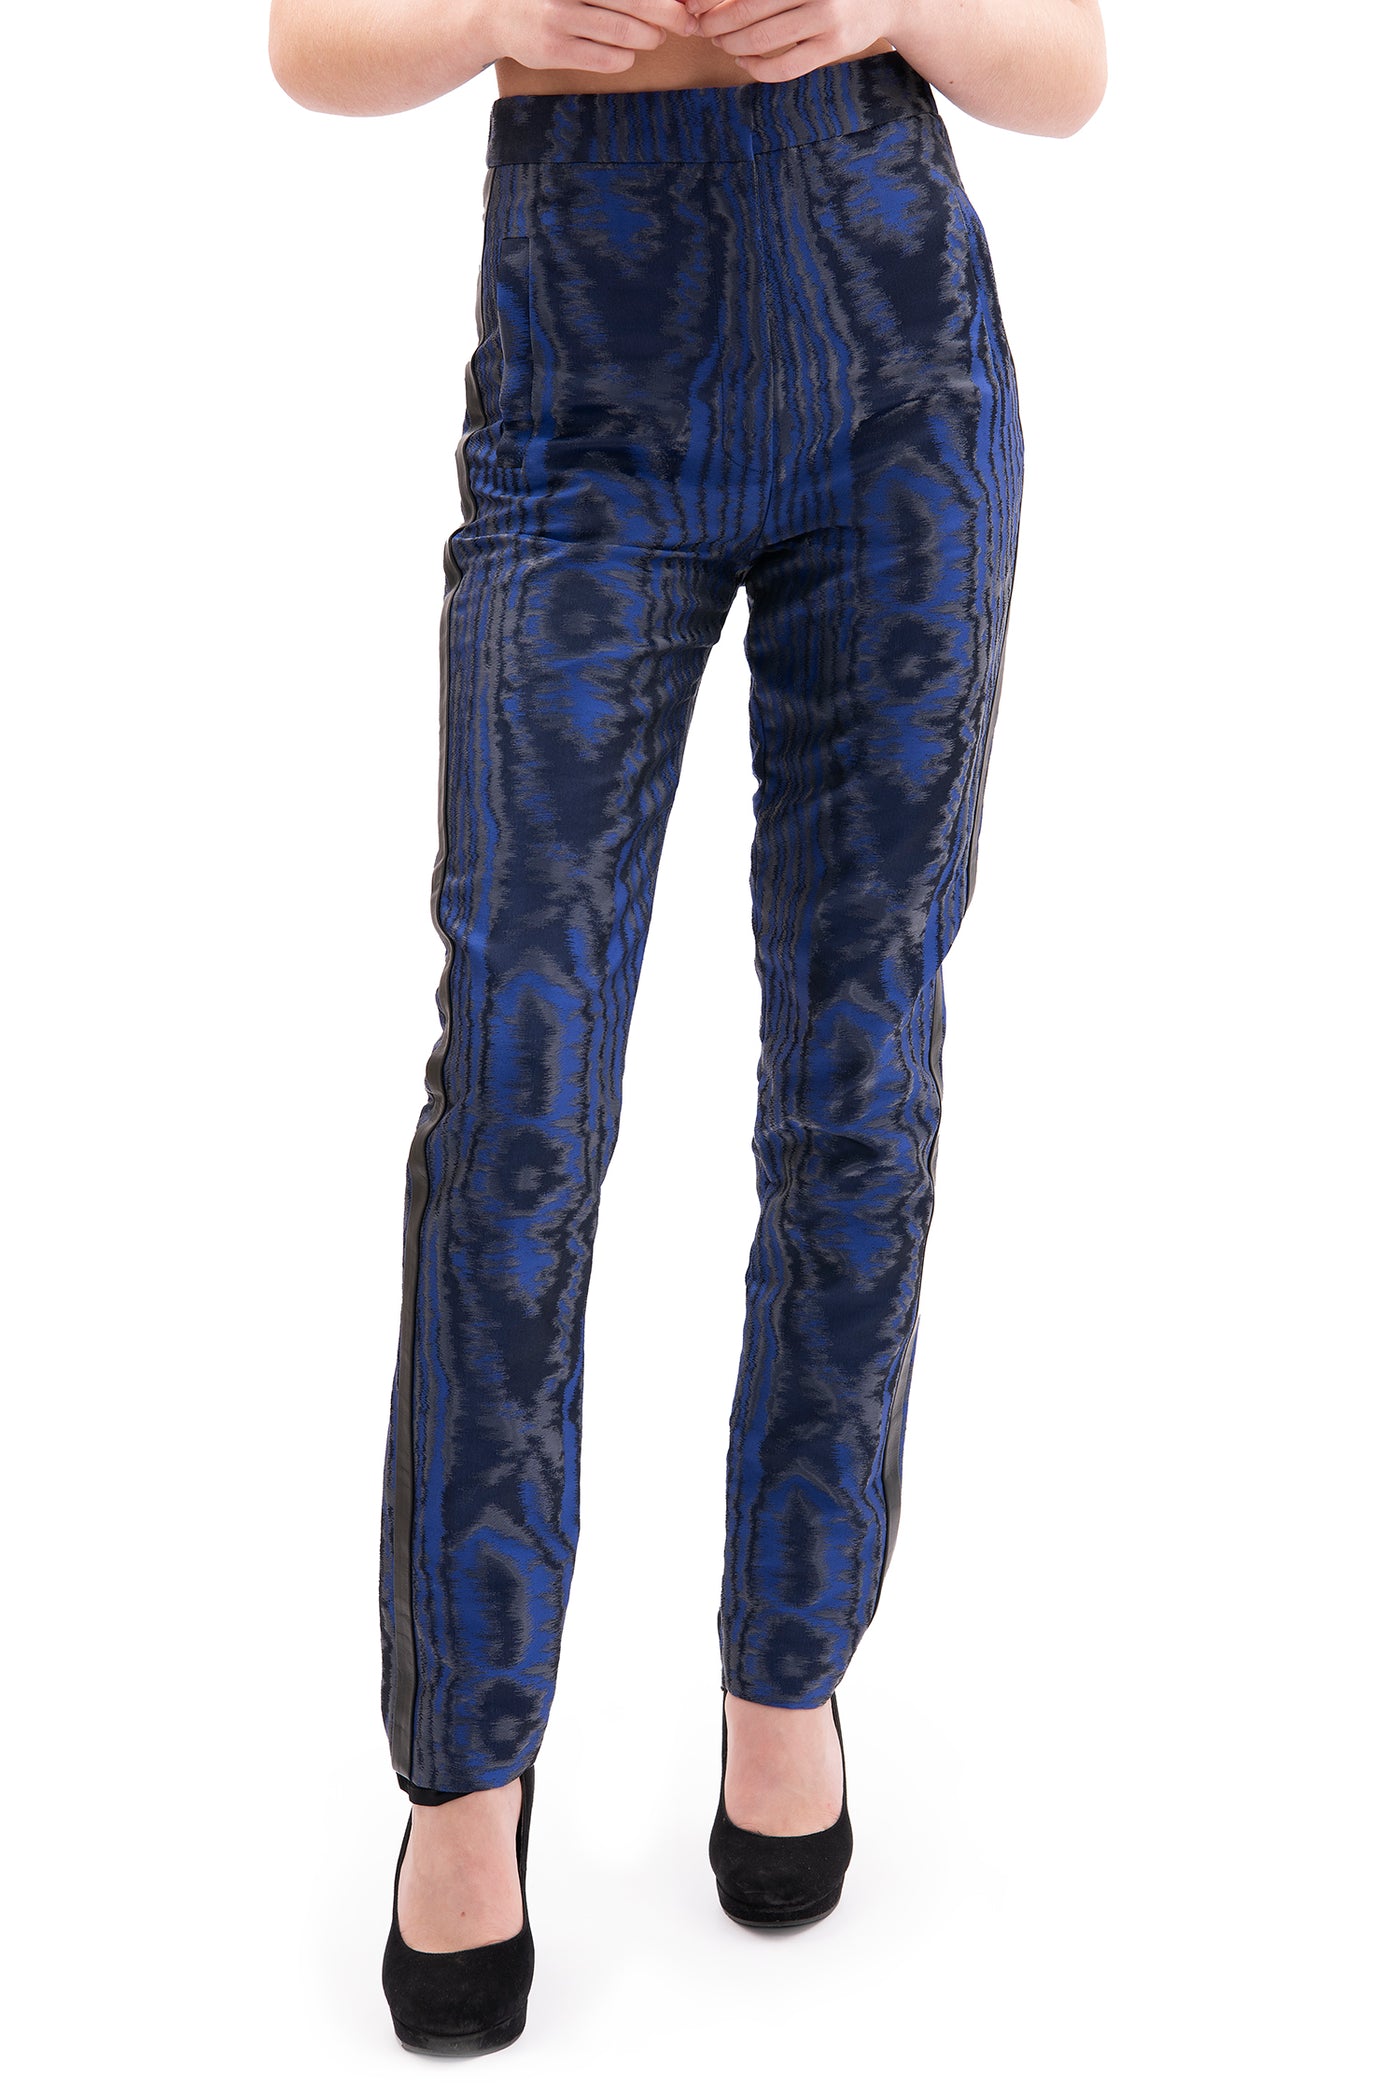 Christopher Kane blue and black trousers moire super